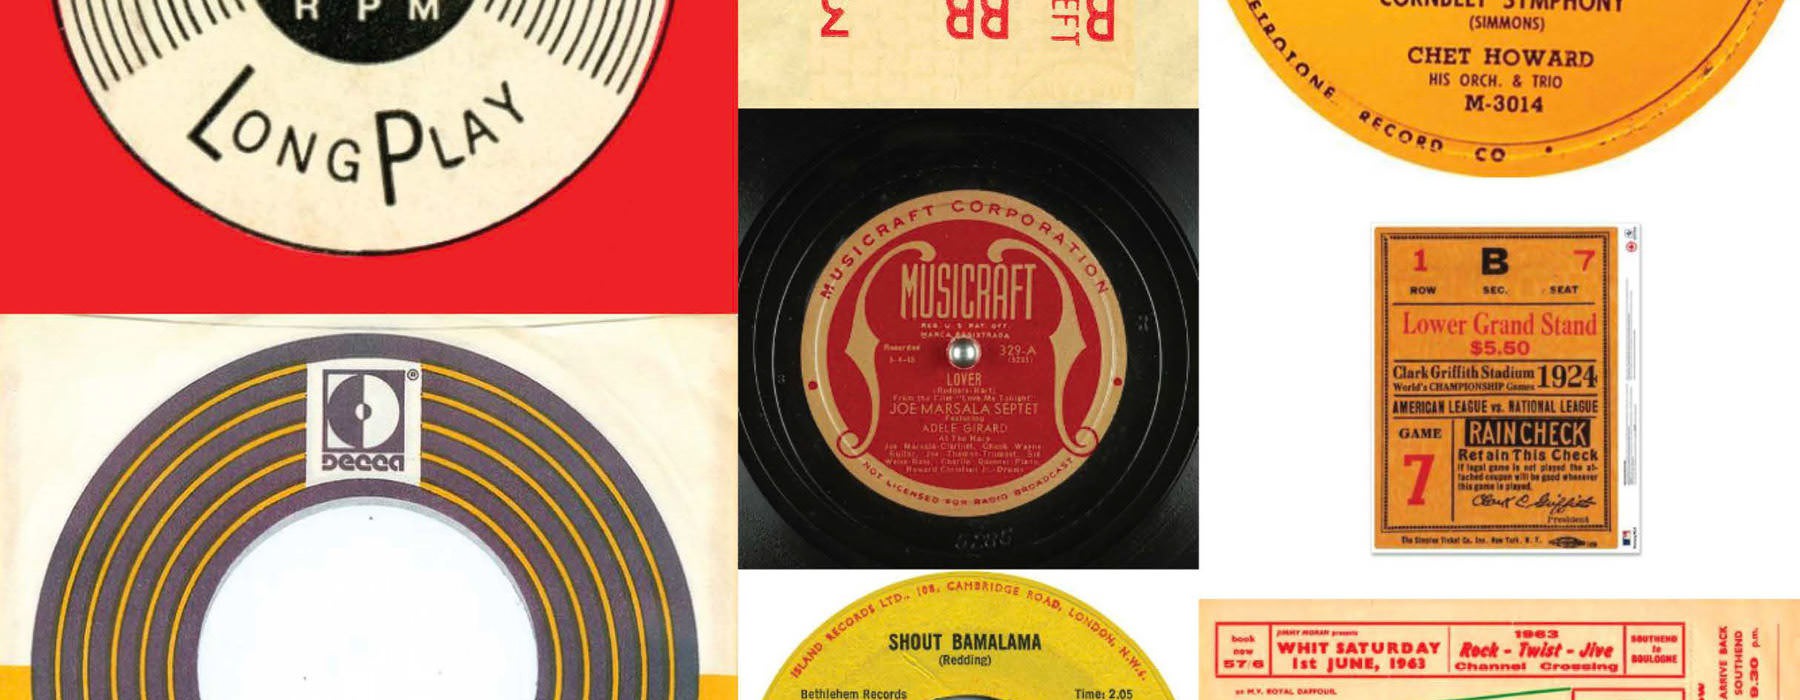 layout of various record albums